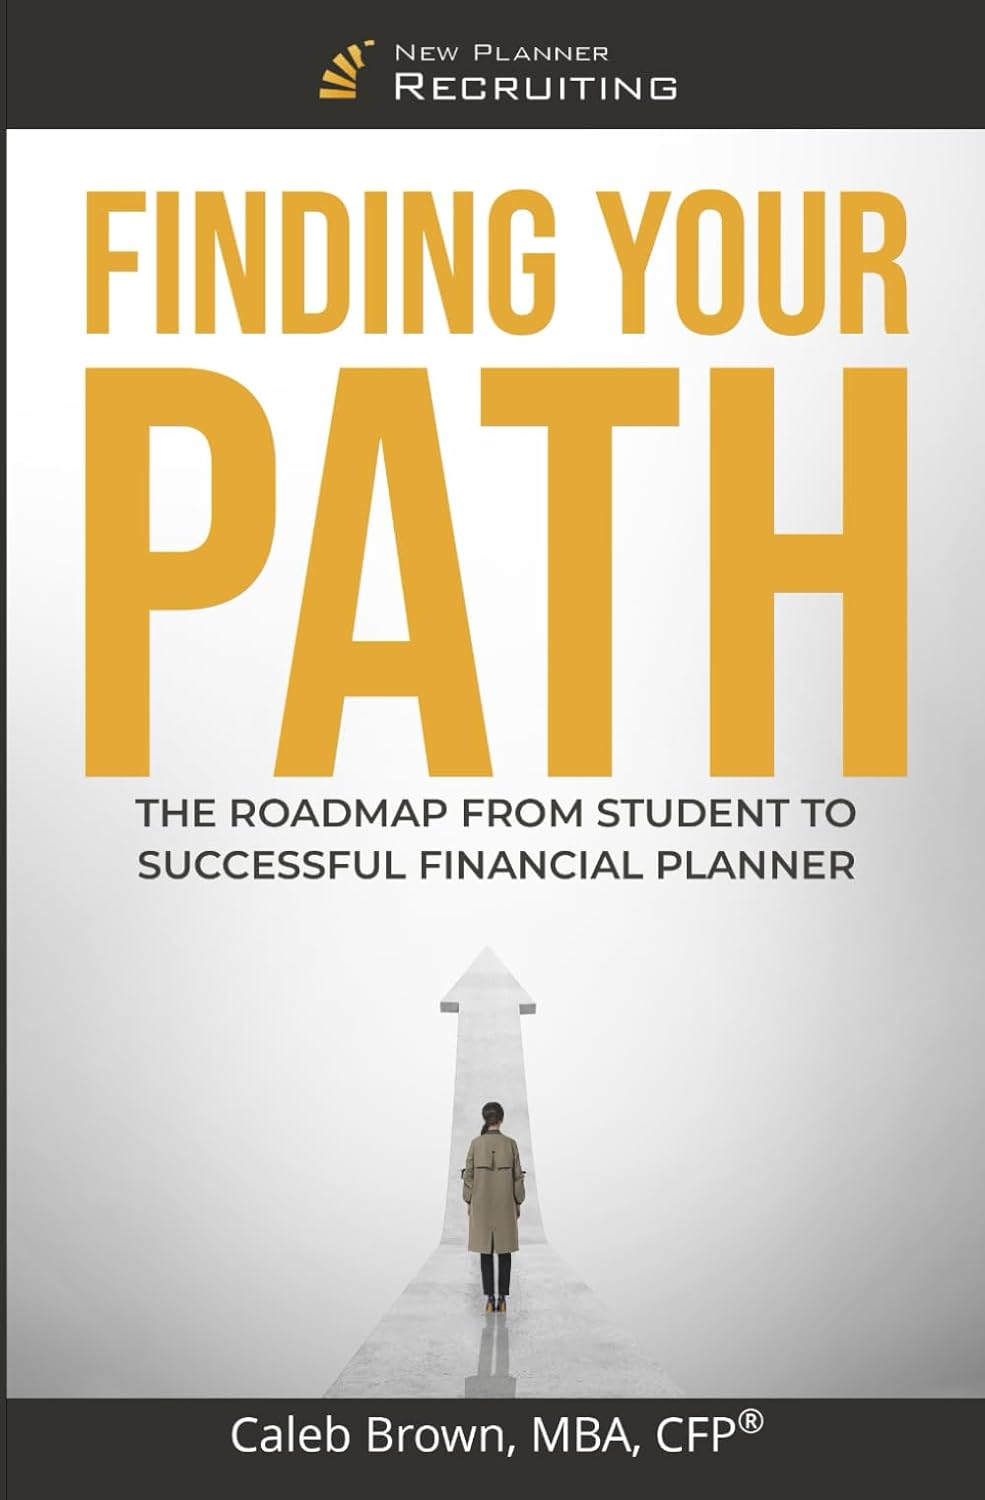 
Finding your Path: The Roadmap from Student to Successful Financial Planner